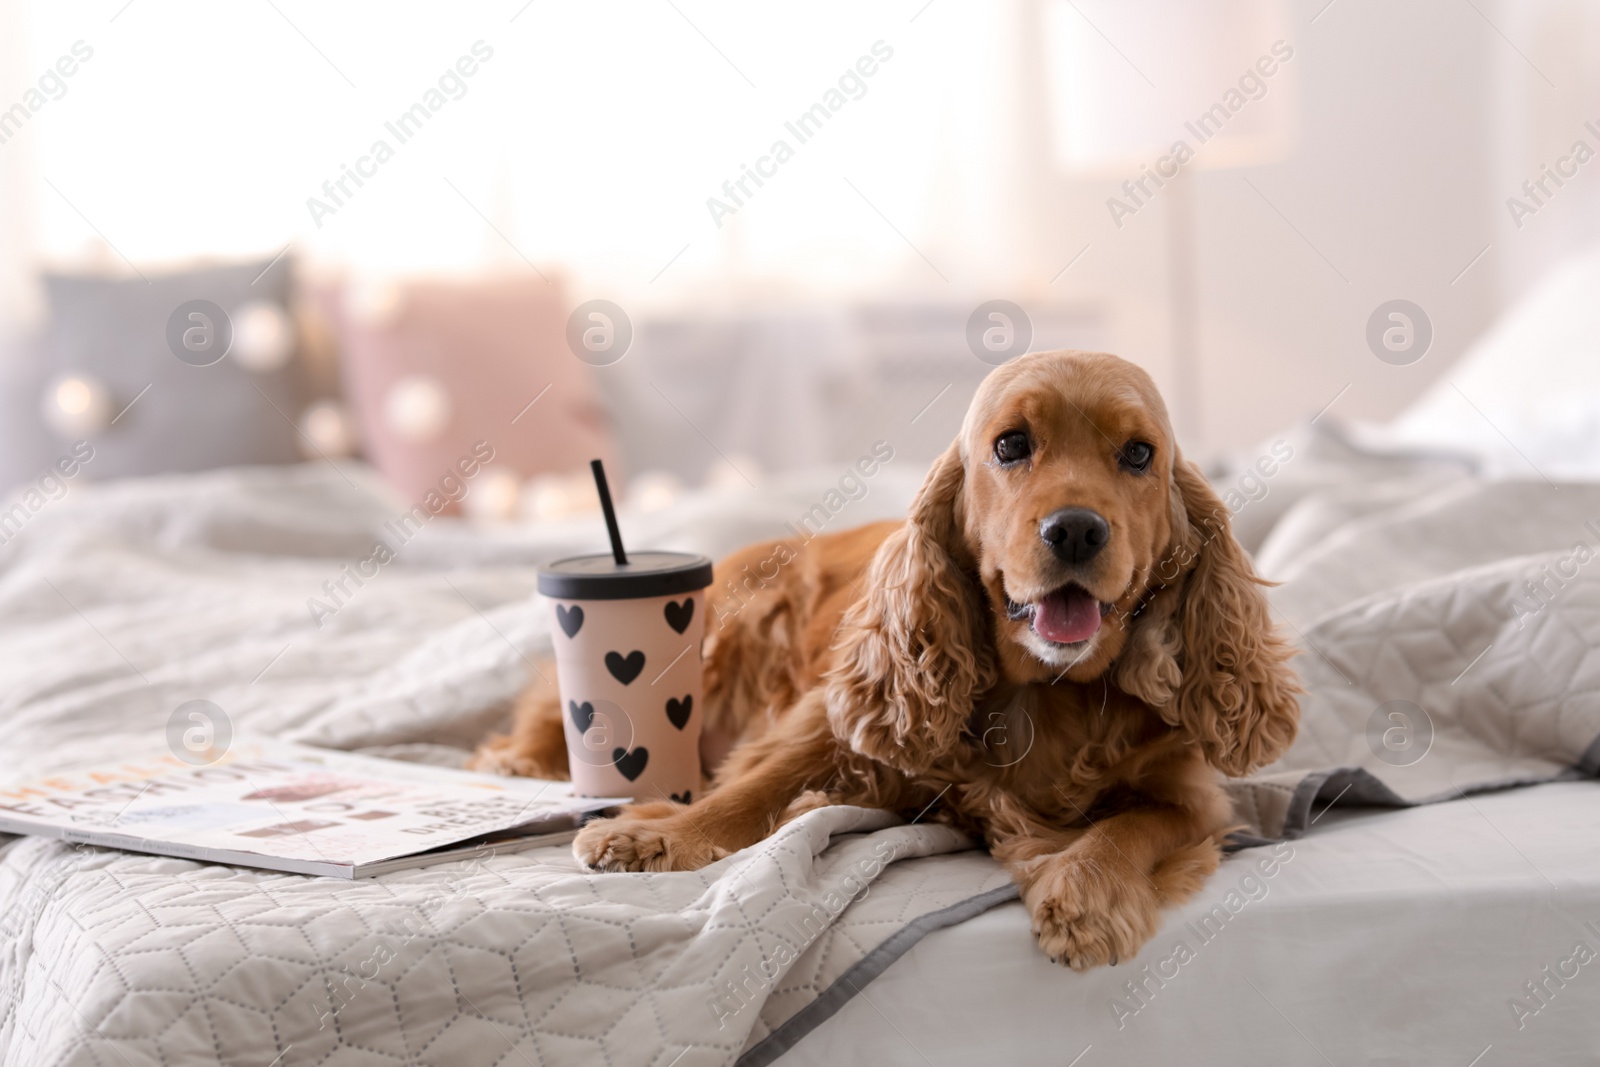 Photo of Cute Cocker Spaniel dog on bed at home. Warm and cozy winter